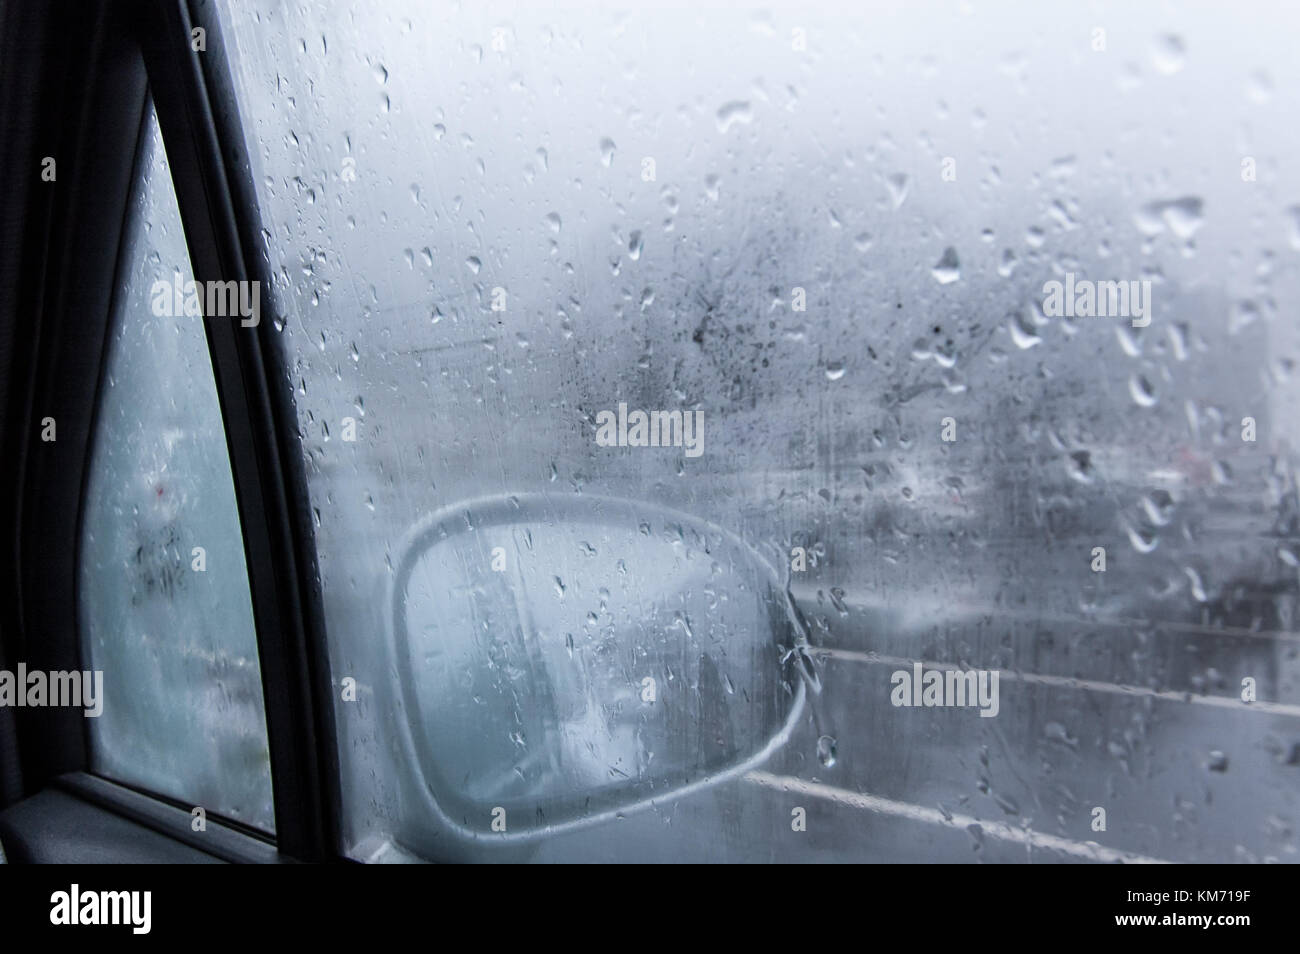 View of a car side mirror from inside the car with condensation and rain on the glass window Stock Photo